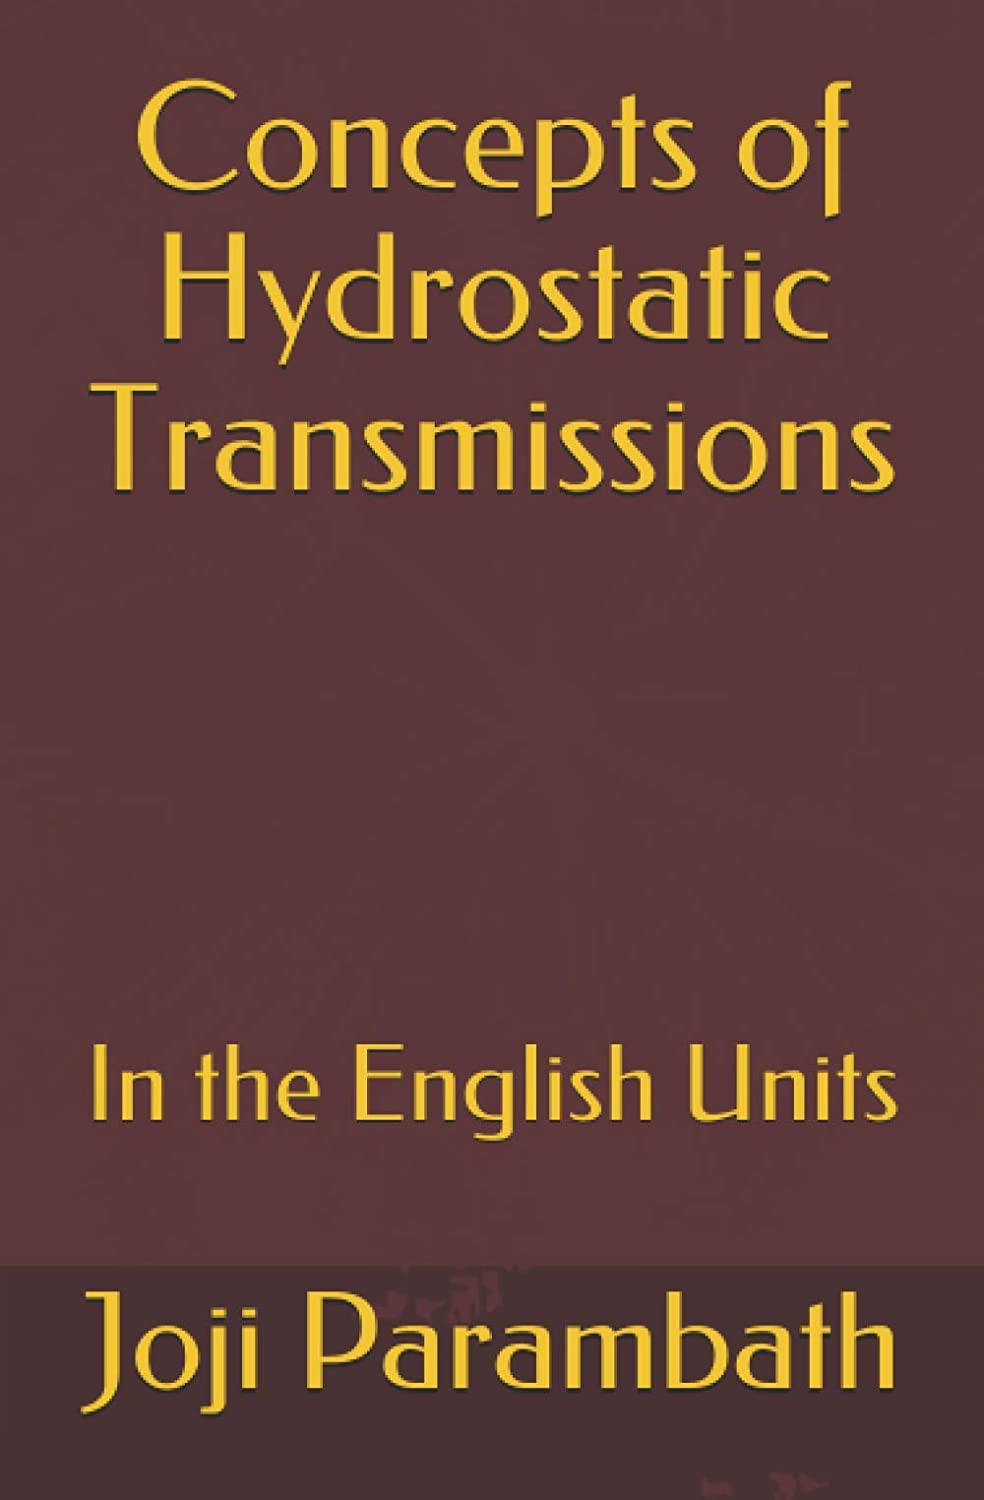 Concepts of Hydrostatic Transmissions: In the English Units